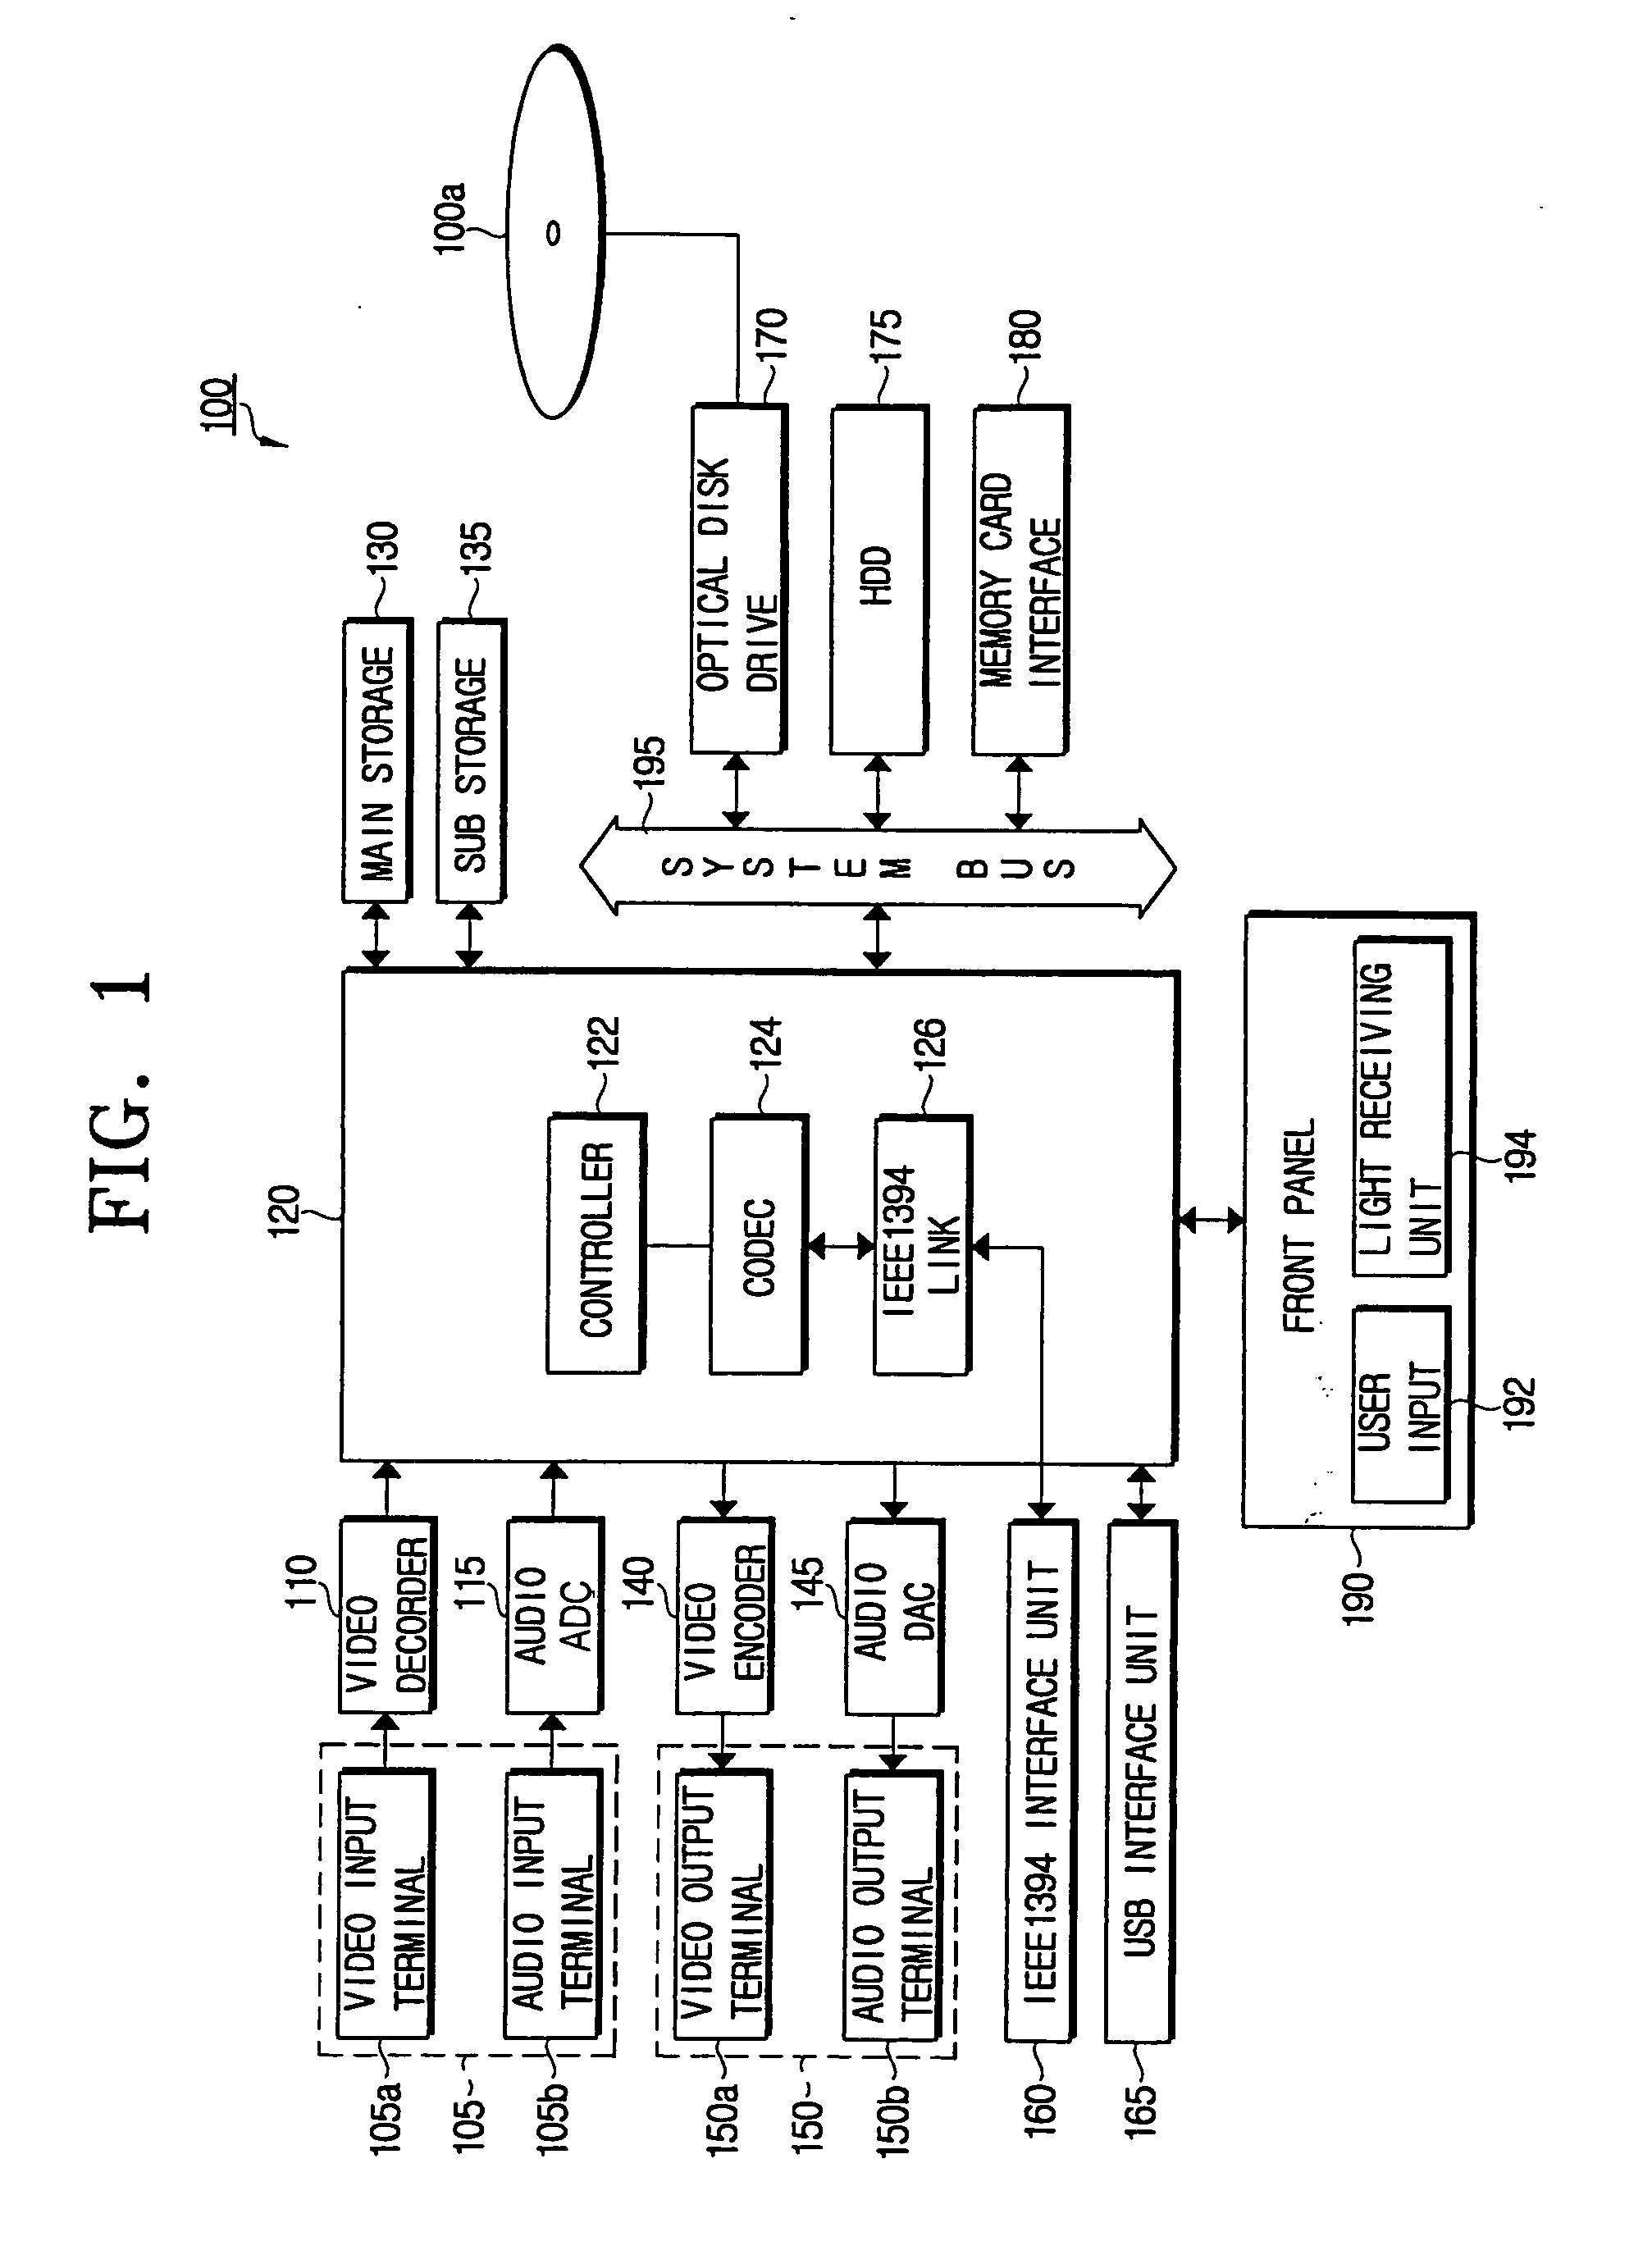 Optical recording and/or reproducing apparatus having codec/IEEE1394 link one-chip